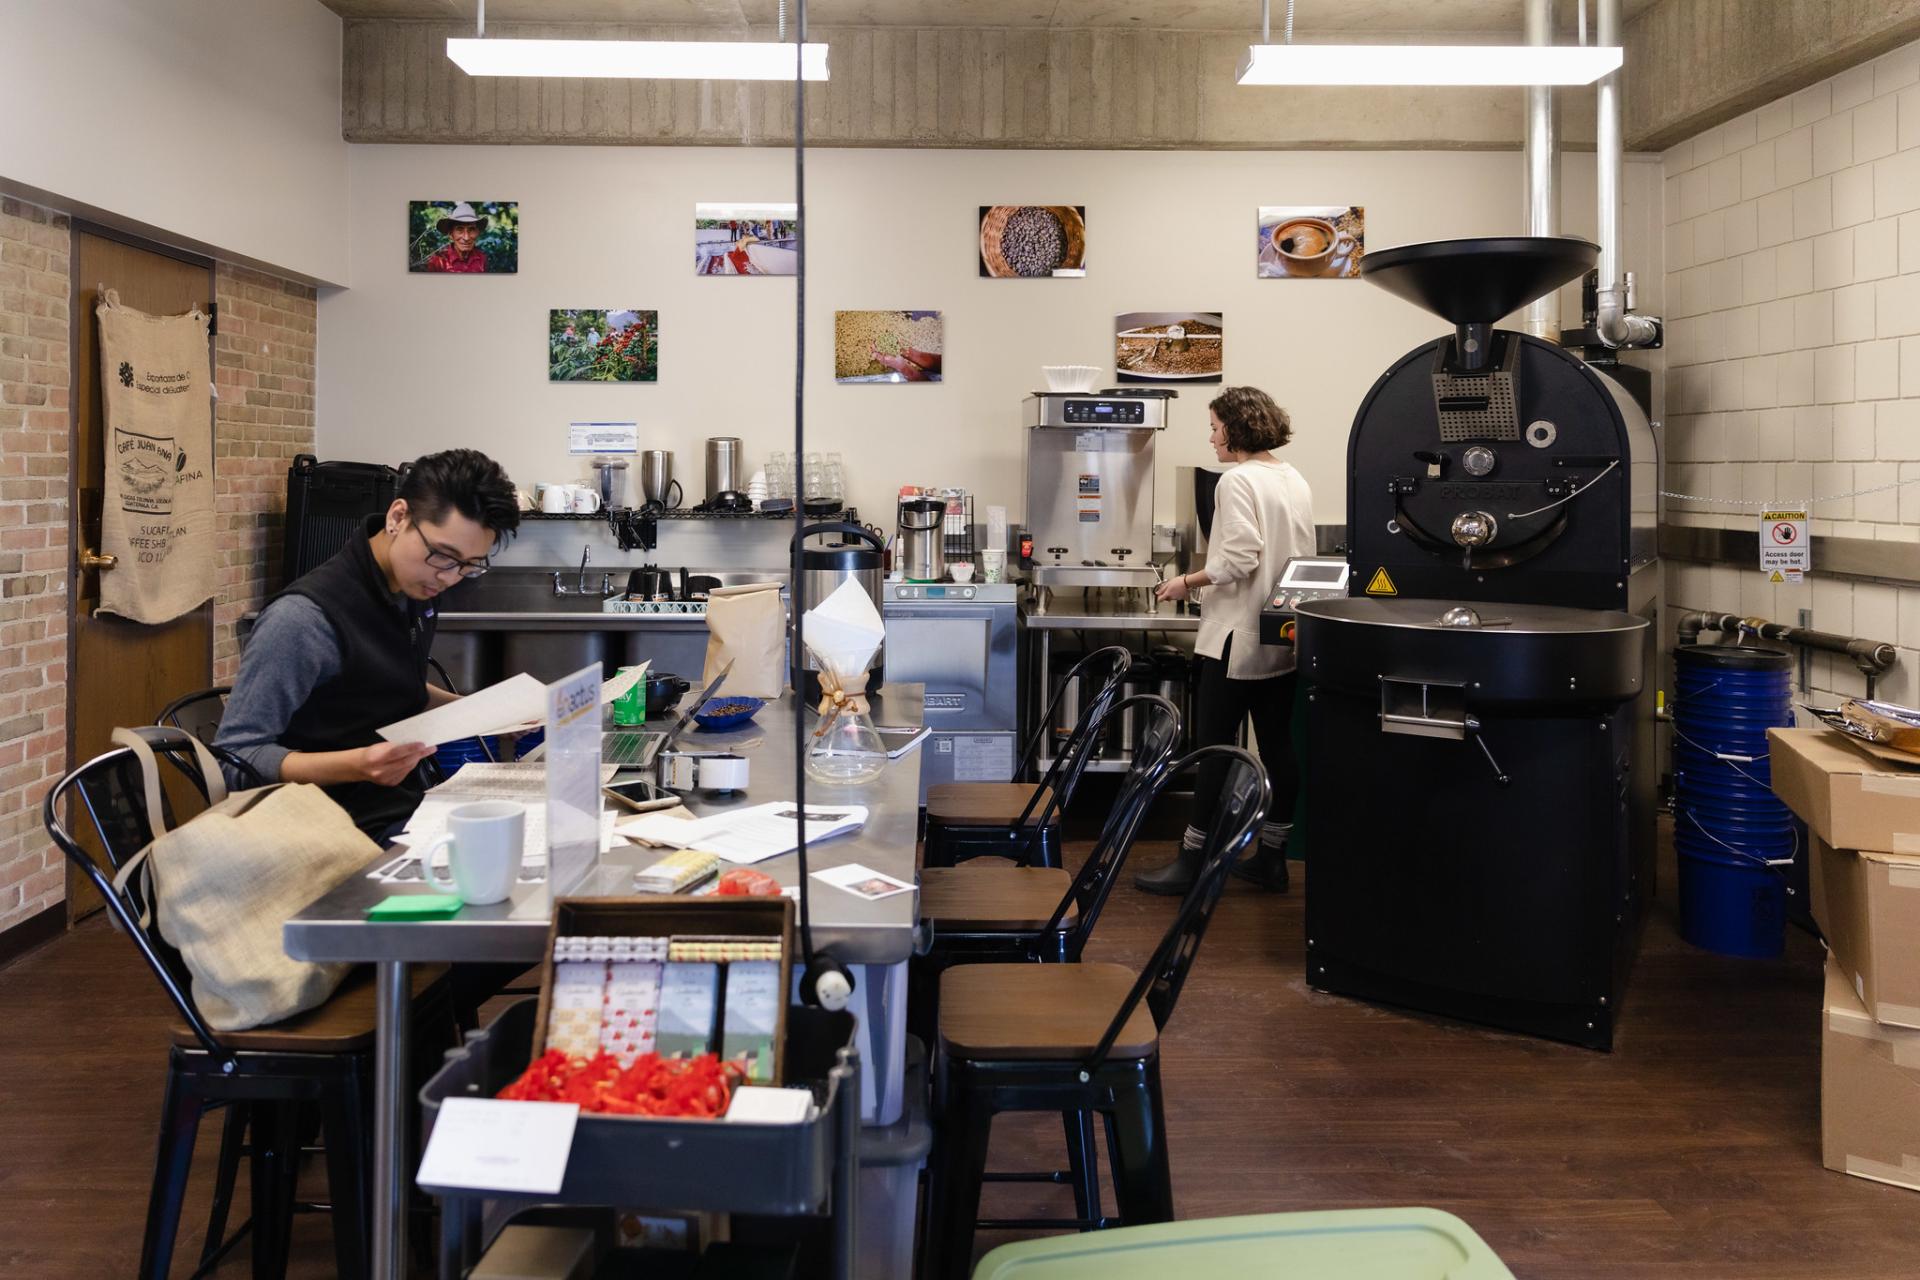 The North Central College Coffee Lab in use by students.